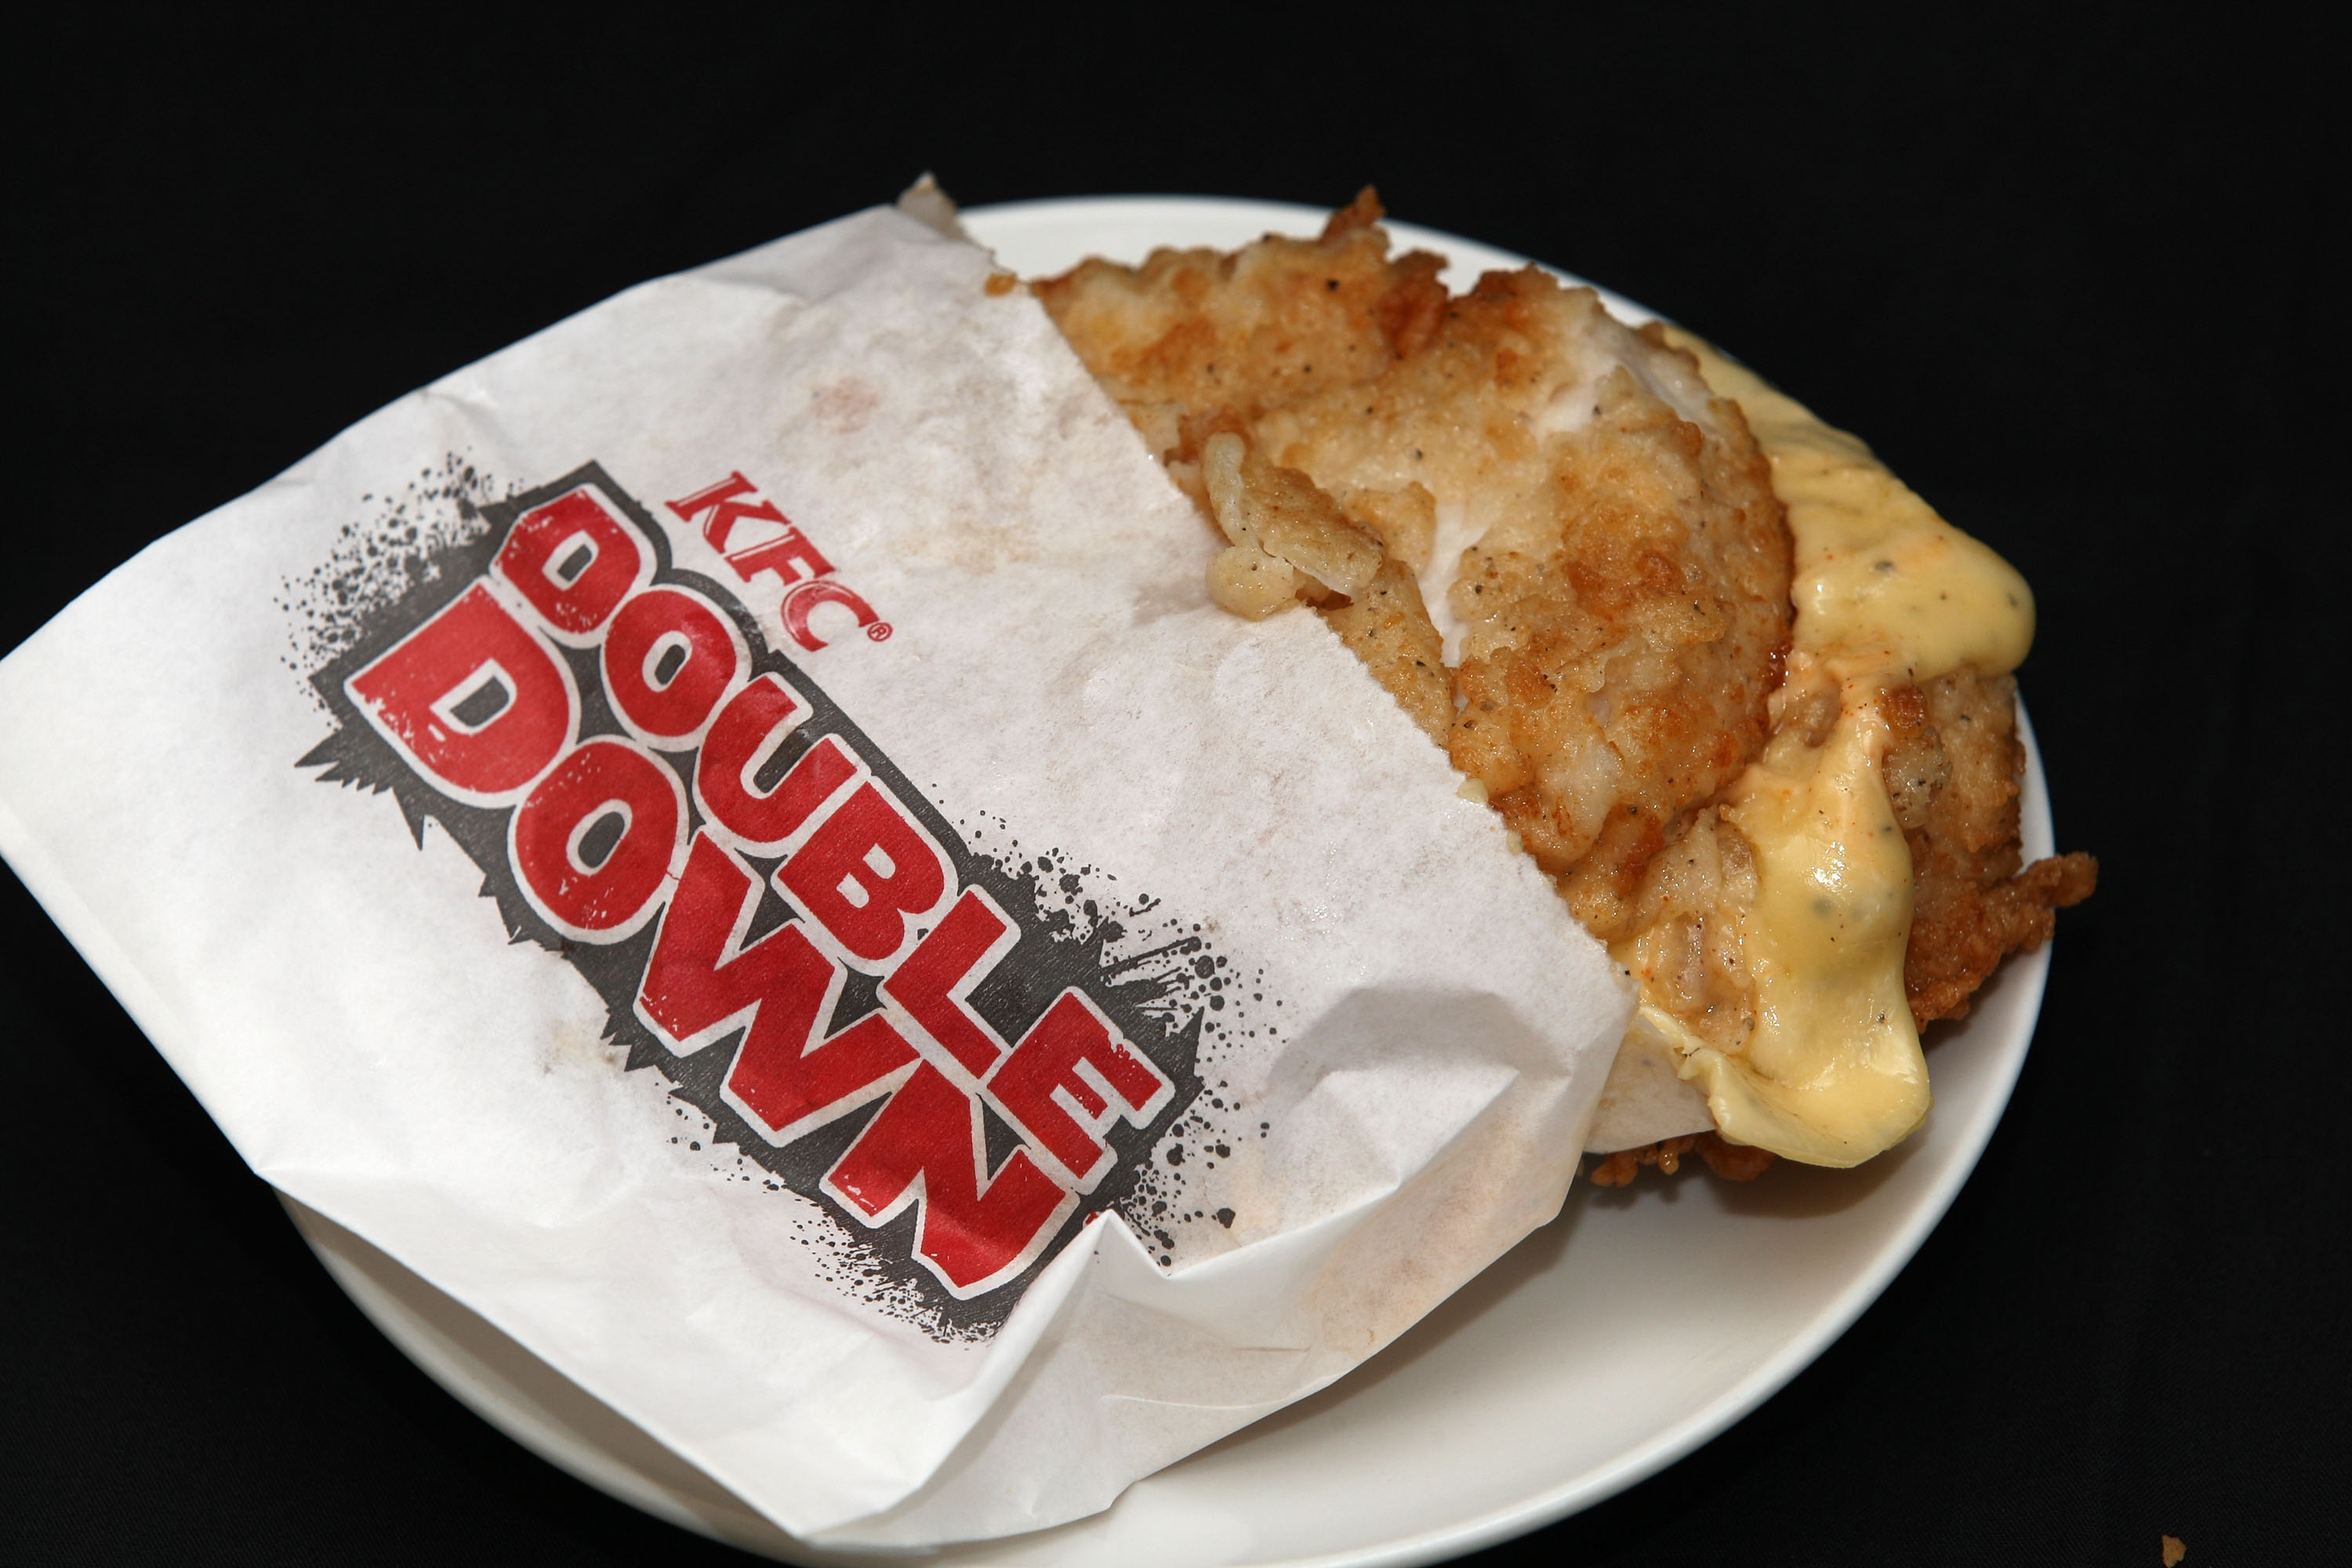 XXX YYY at XXX on May 10, 2011 in Auckland, New Zealand. The KFC 'Double Down' is a 604-calorie 'bunless' burger that consists of two strips of bacon, cheese and 'special sauce' served between two KFC chicken fillets and has been a hot topic after being condemned by nutritionists concerned with the high calorie and saturated fat content. (Sandra Mu&mdash;Getty Images)